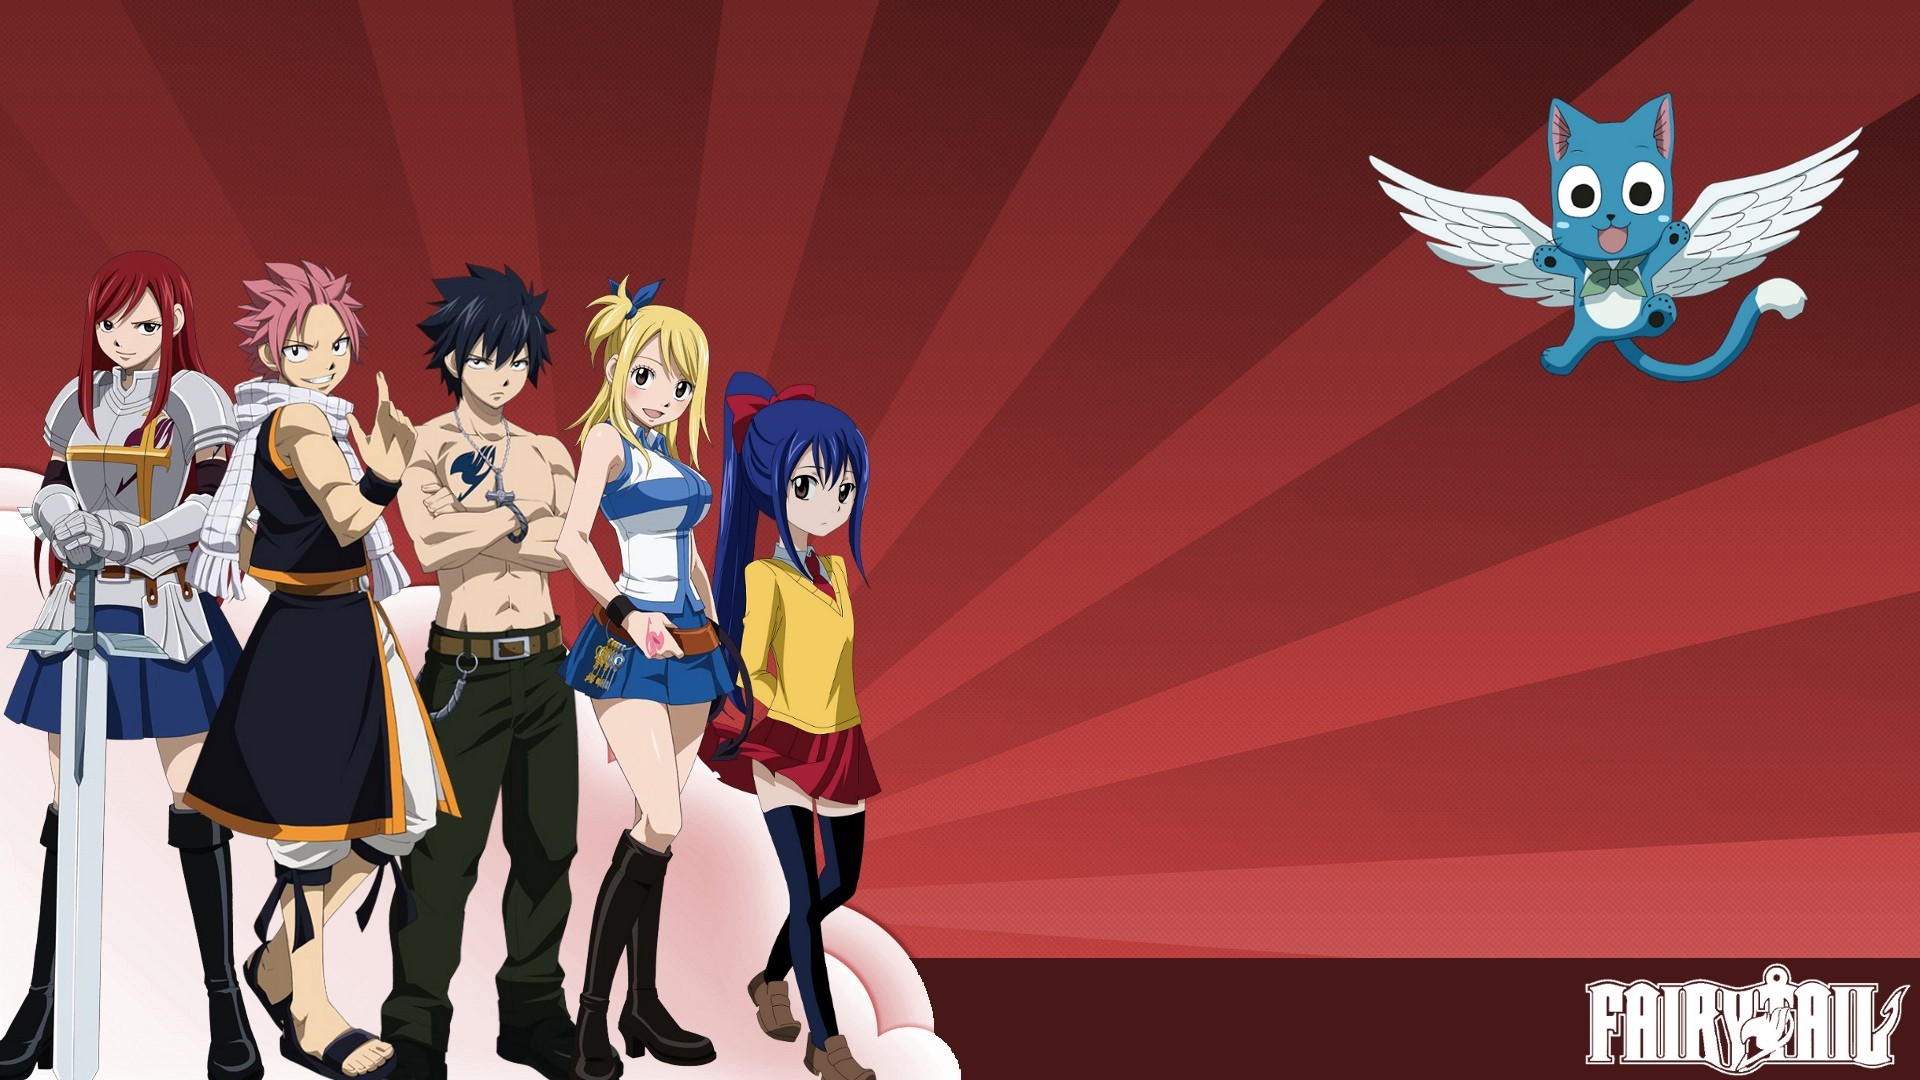 Scarlet Erza Dragneel Natsu Fullbuster Gray Heartfilia Lucy Marvell Wendy Happy Fairy Tail Anime Gir 1920x1080